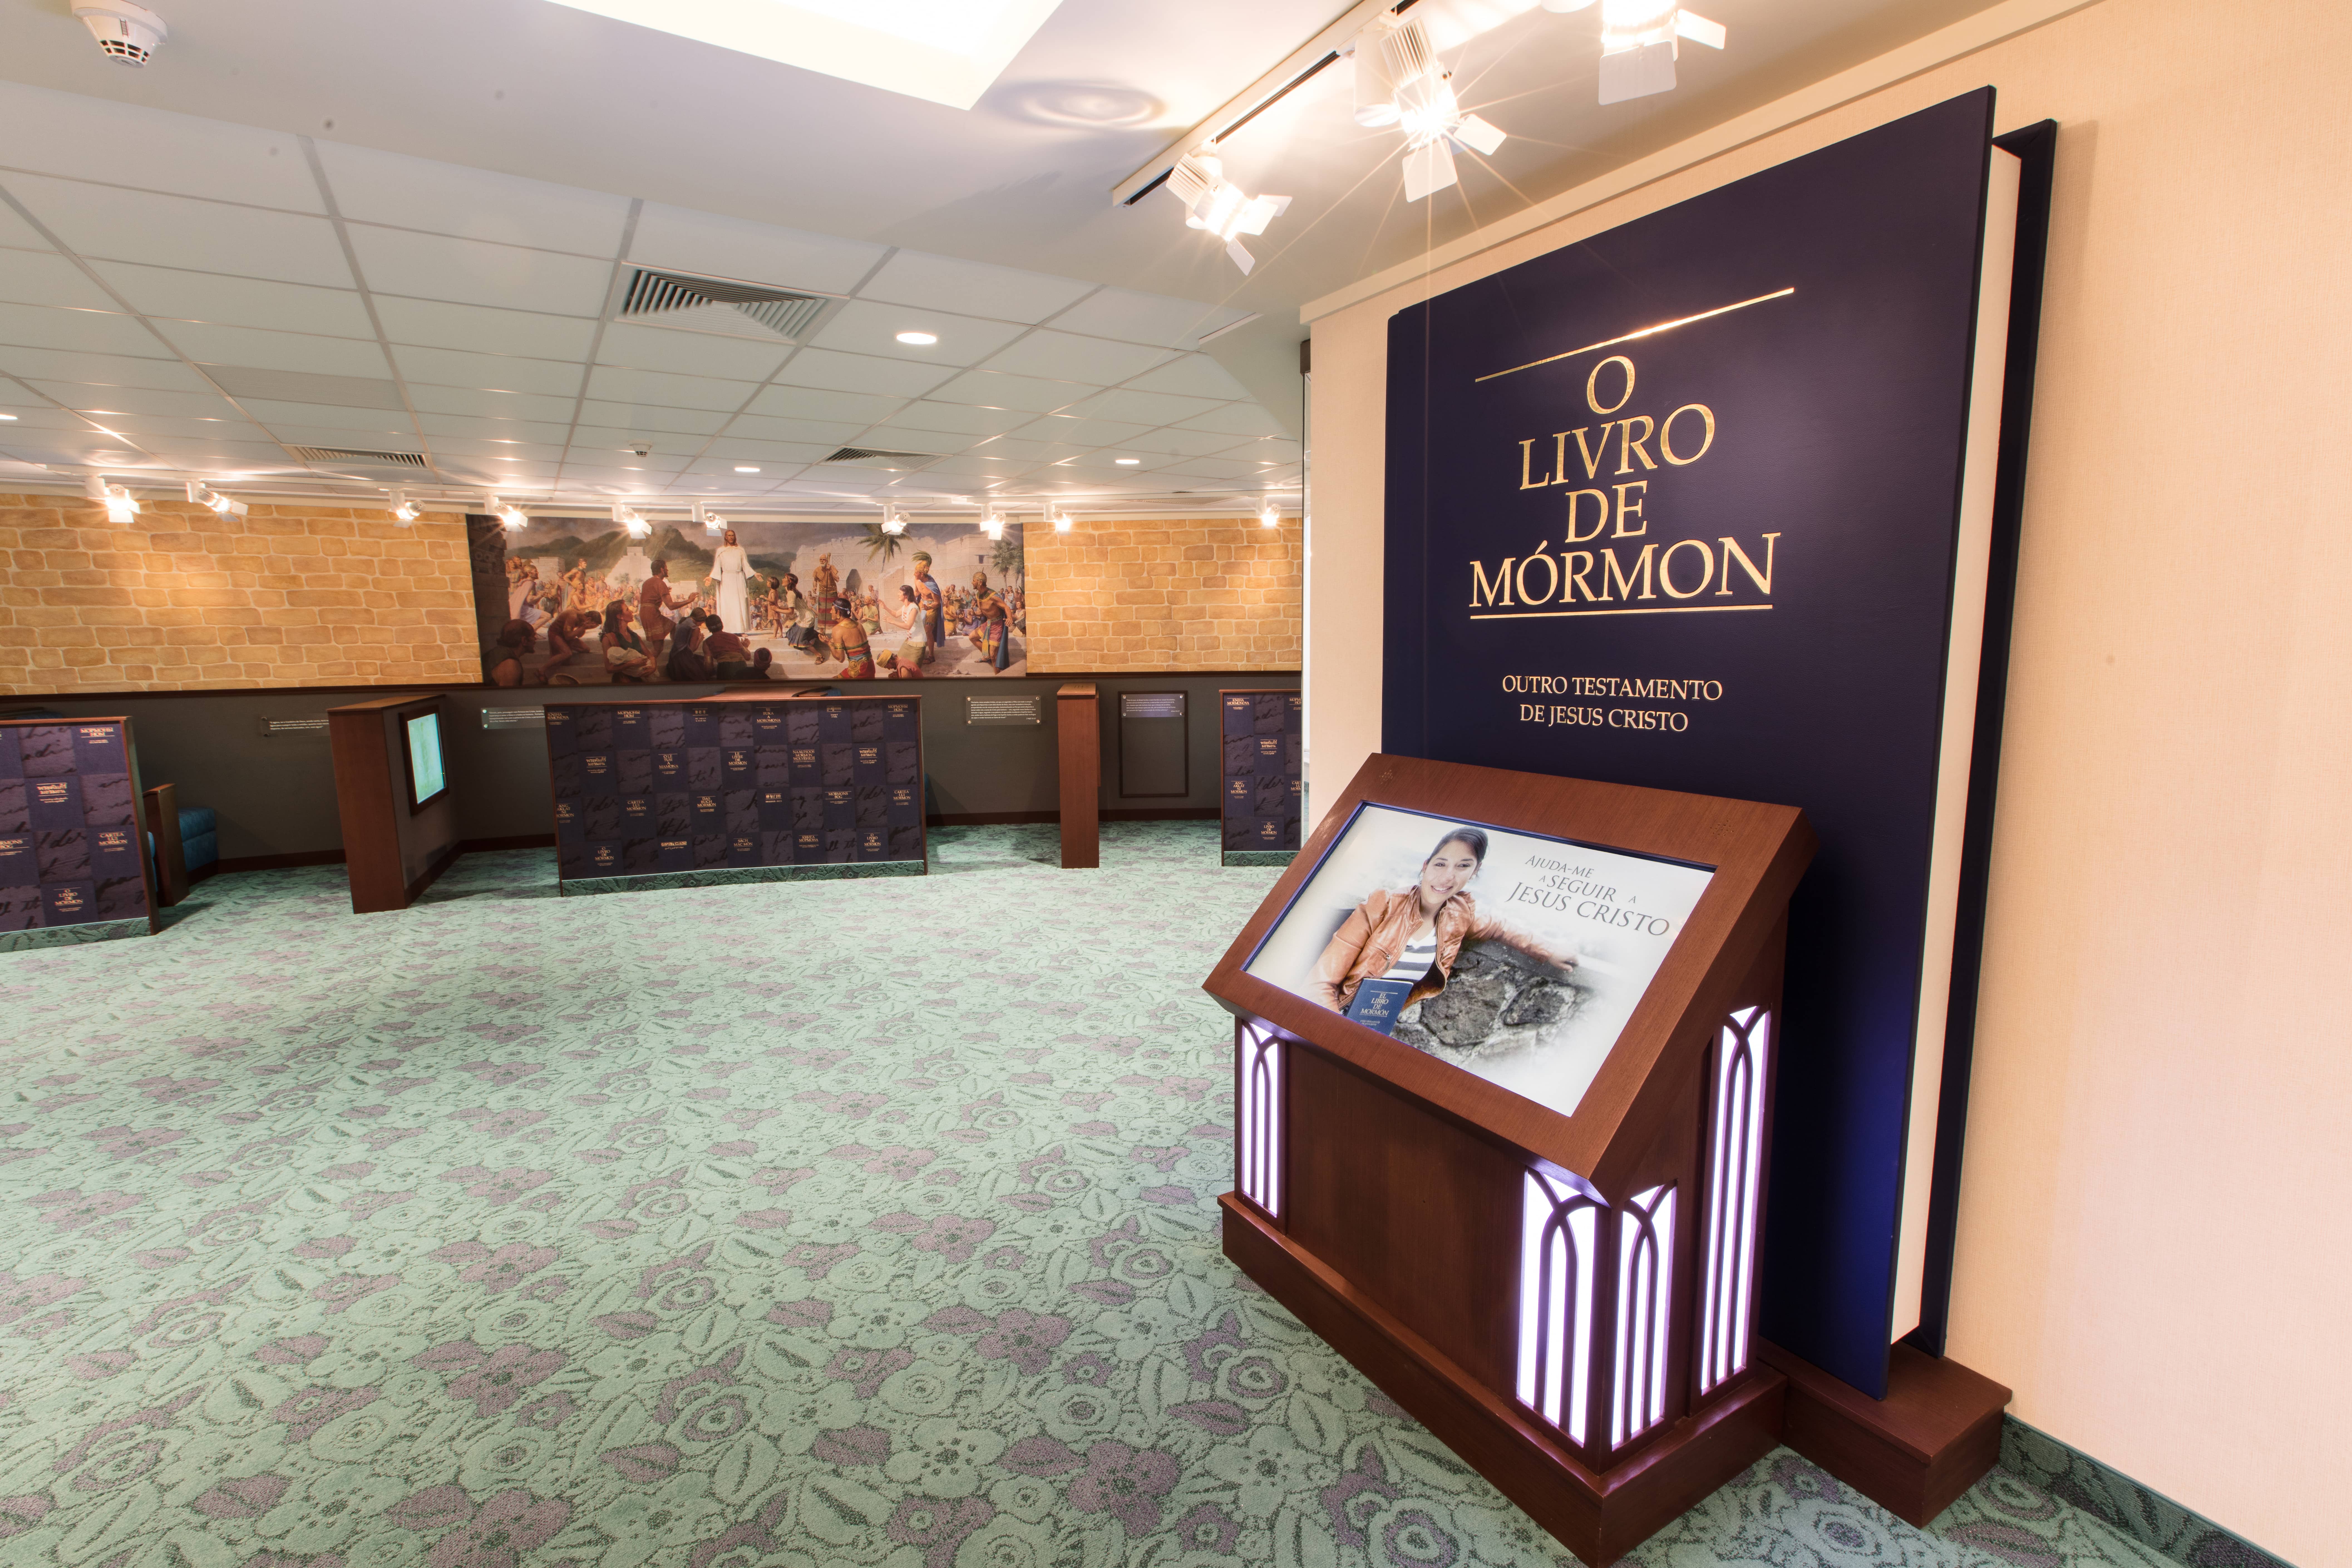 A giant replica of a copy of the Book of Mormon stands against the wall.